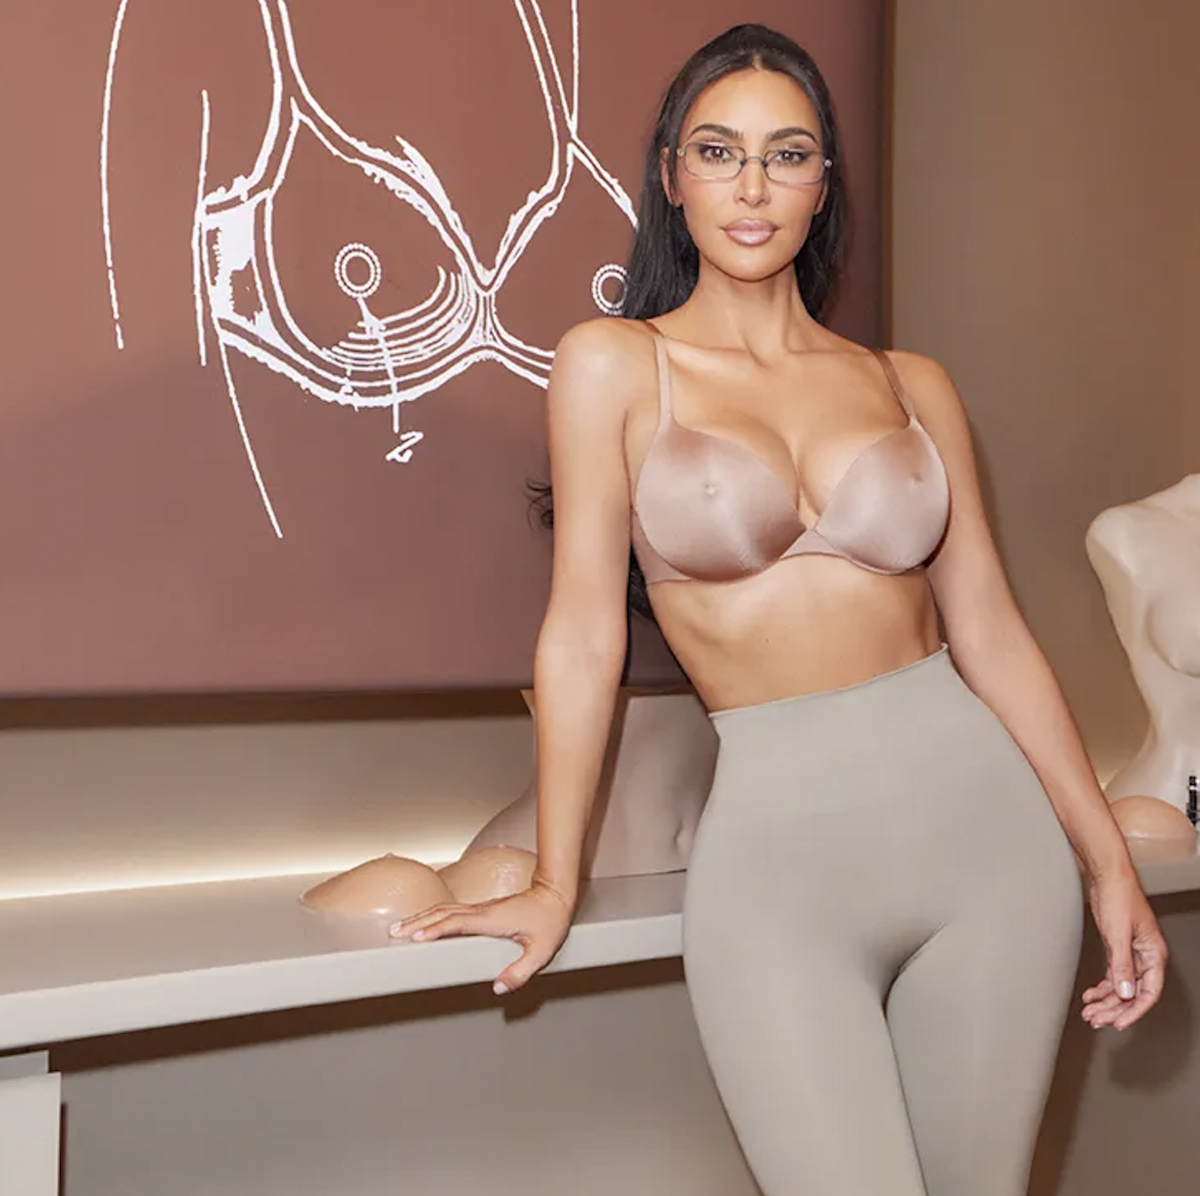 Kim Kardashian's Hot Pink Lingerie Featured a Two-in-One Midriff